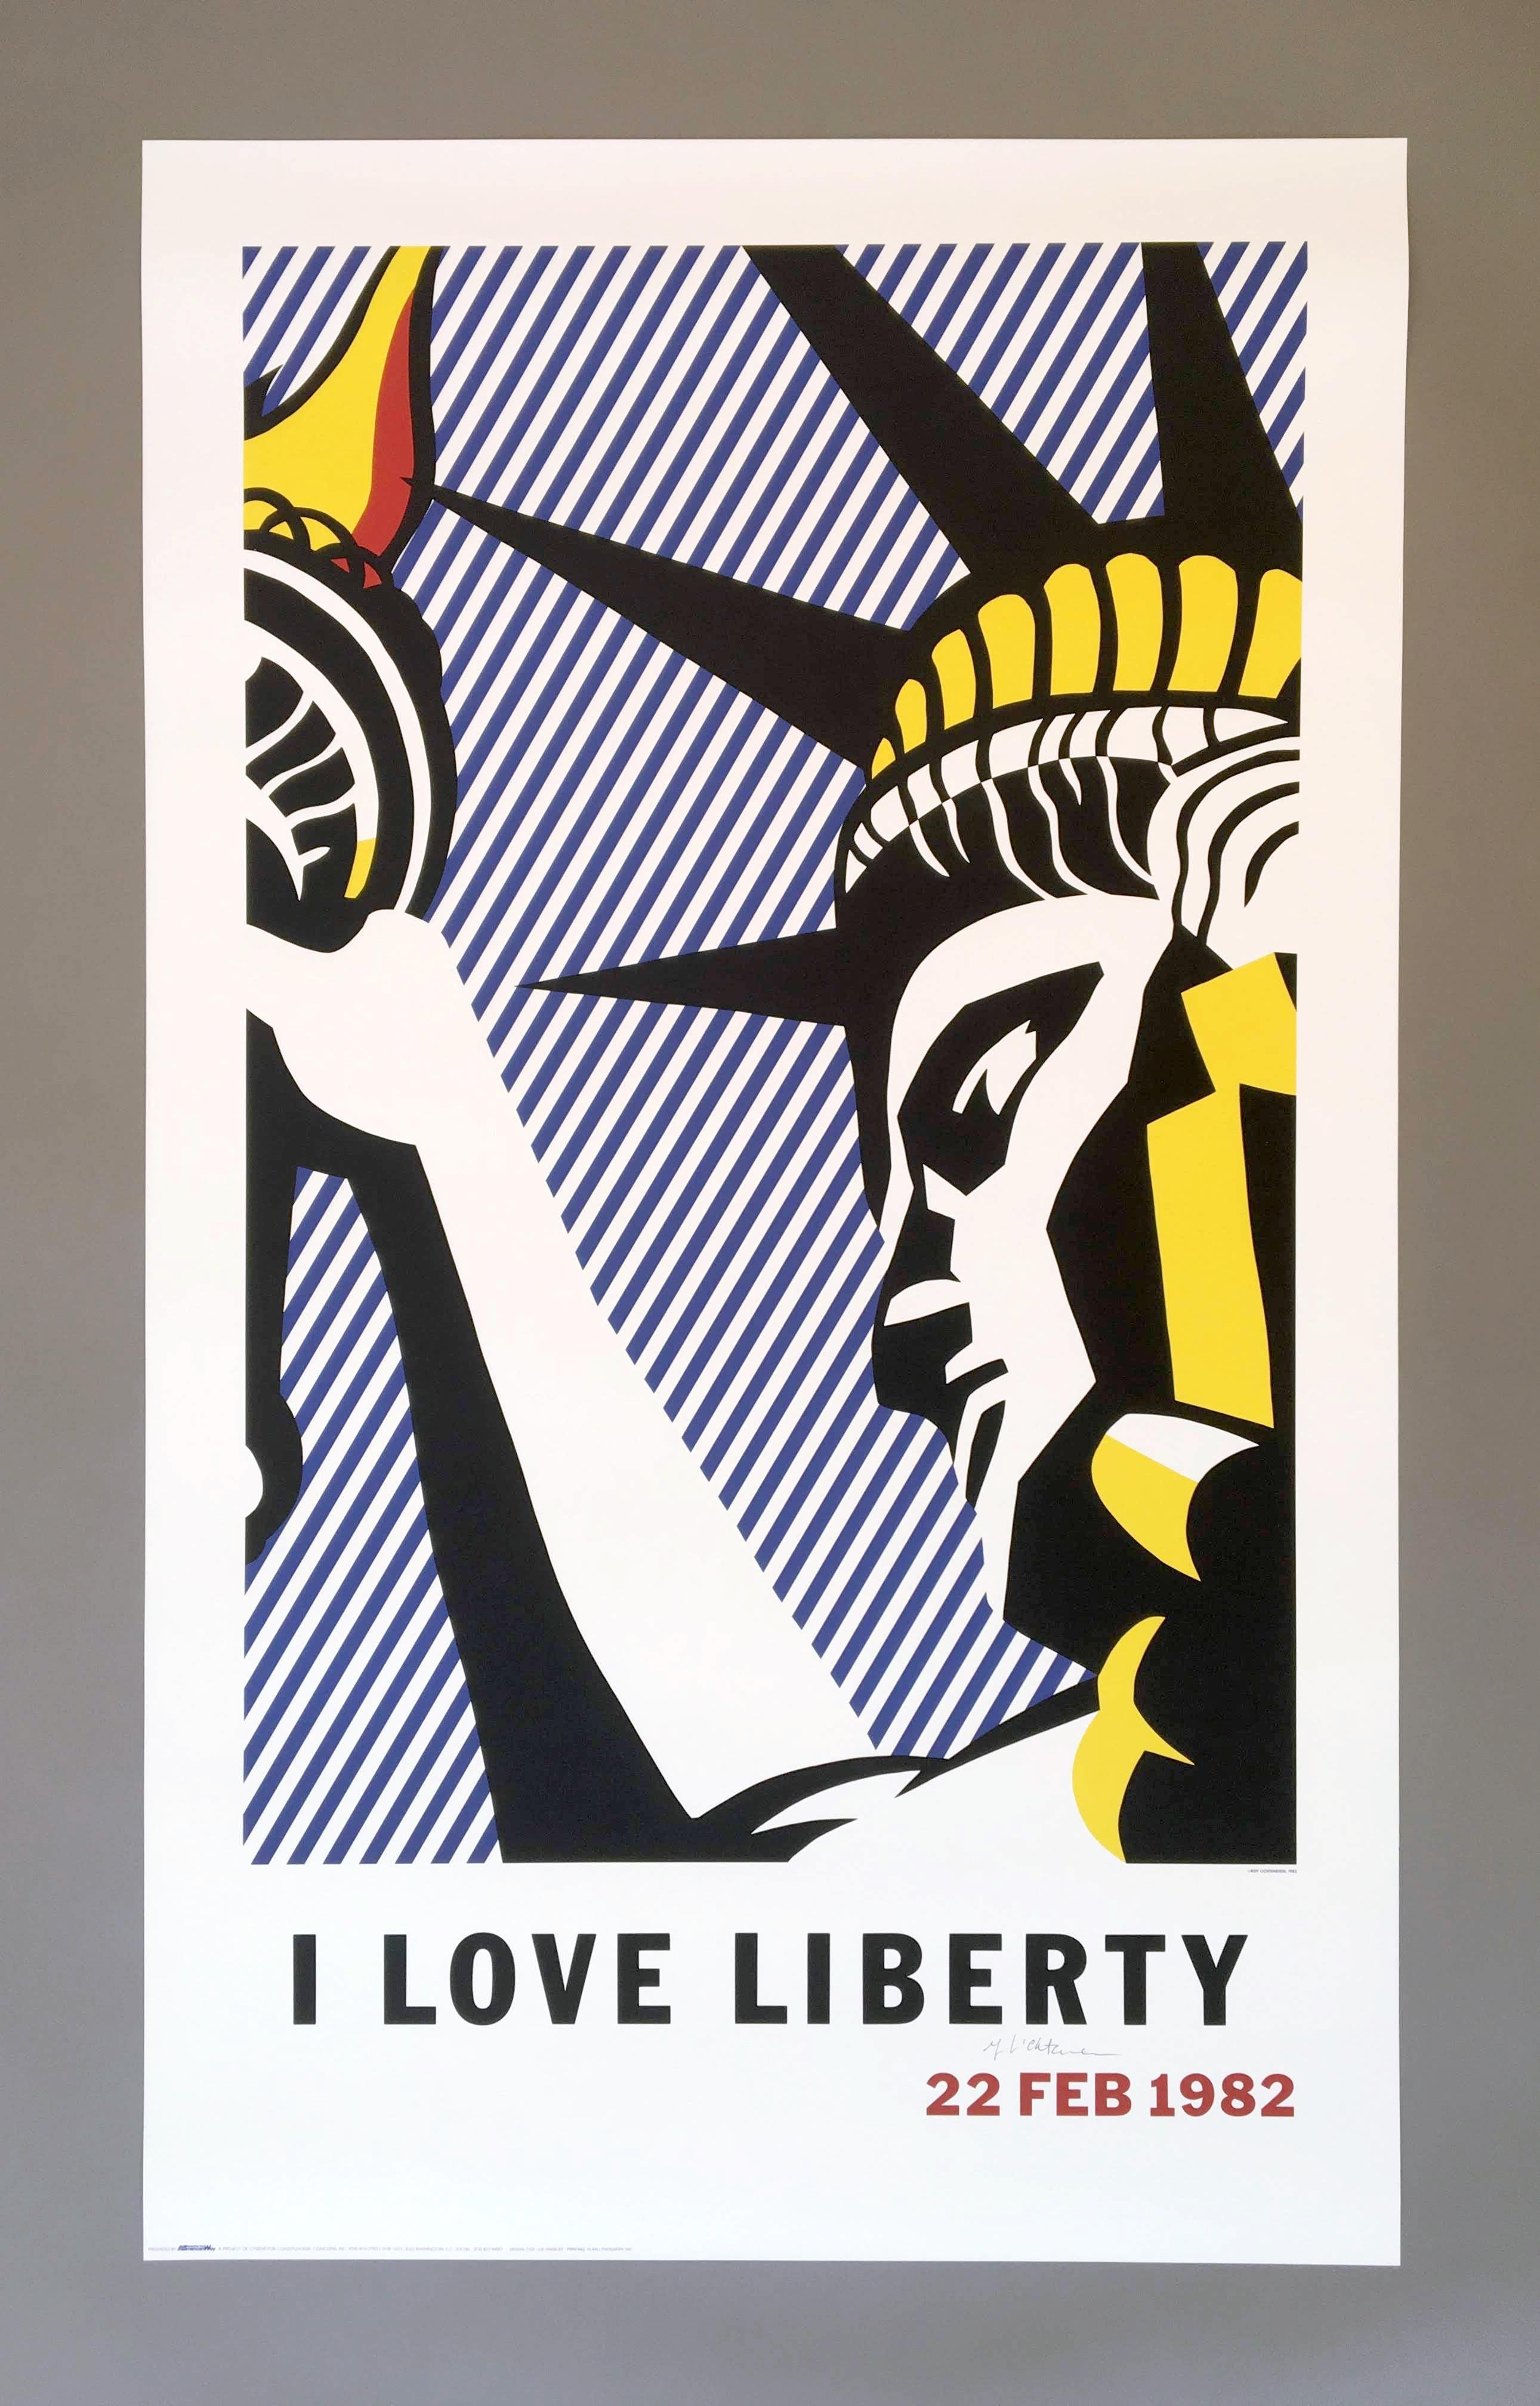 Roy Lichtenstein (United States, 1923-1997)
'I Love Liberty', 1982
 
This famous image features the iconic Statue of Liberty and was created in partnership with the 'I Love Liberty' celebration in 1982, filmed in Los Angeles and broadcasted on